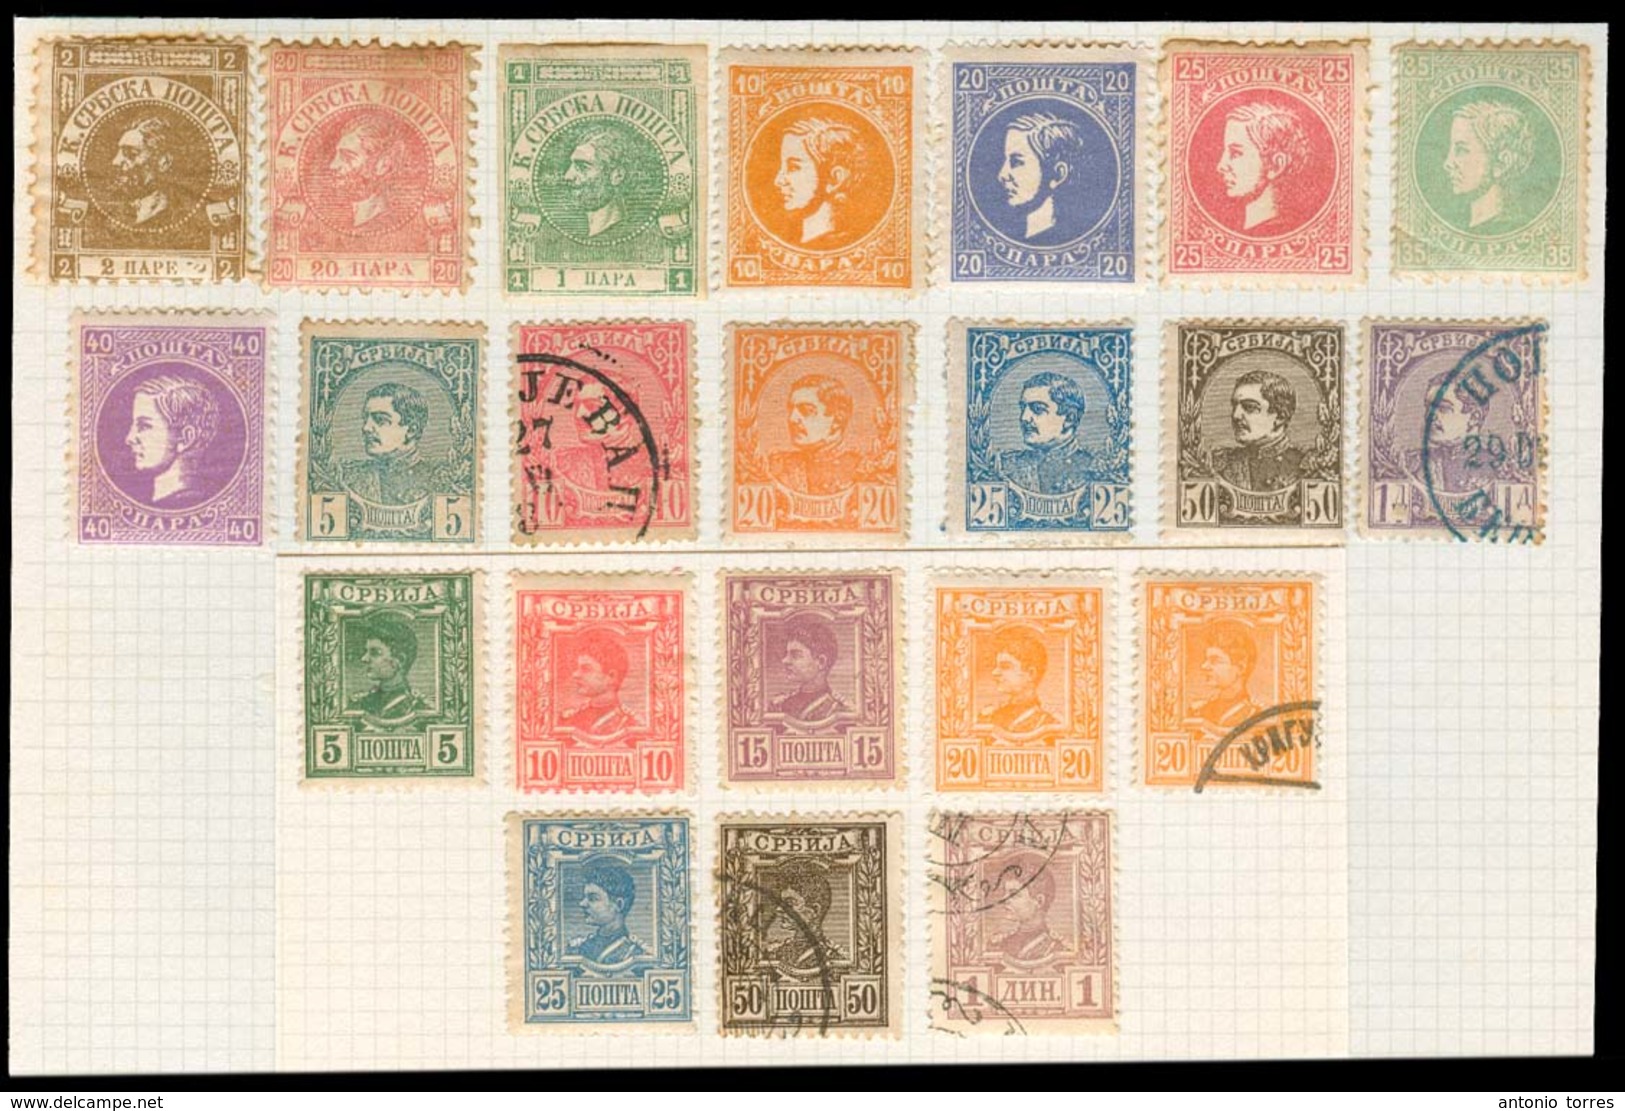 SERBIA. 1866-1900. Original Coll. Remainder / One Album Page. 22 Stamps. Mostly F-VF. - Serbia